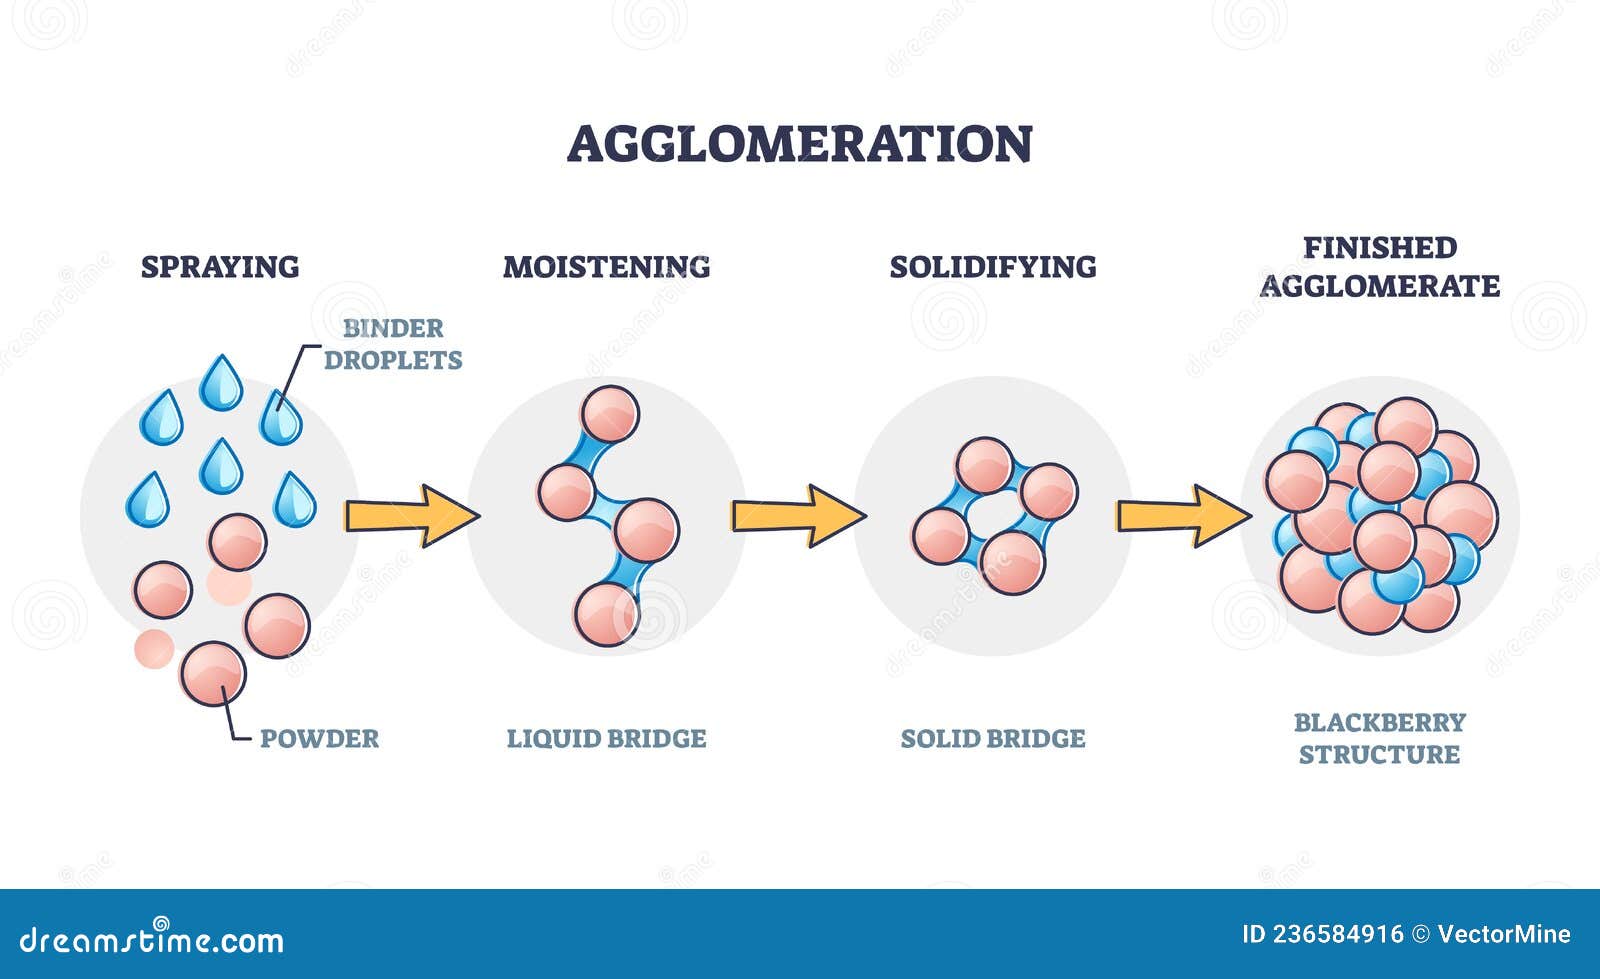 agglomeration process explanation with powder and bridges outline diagram